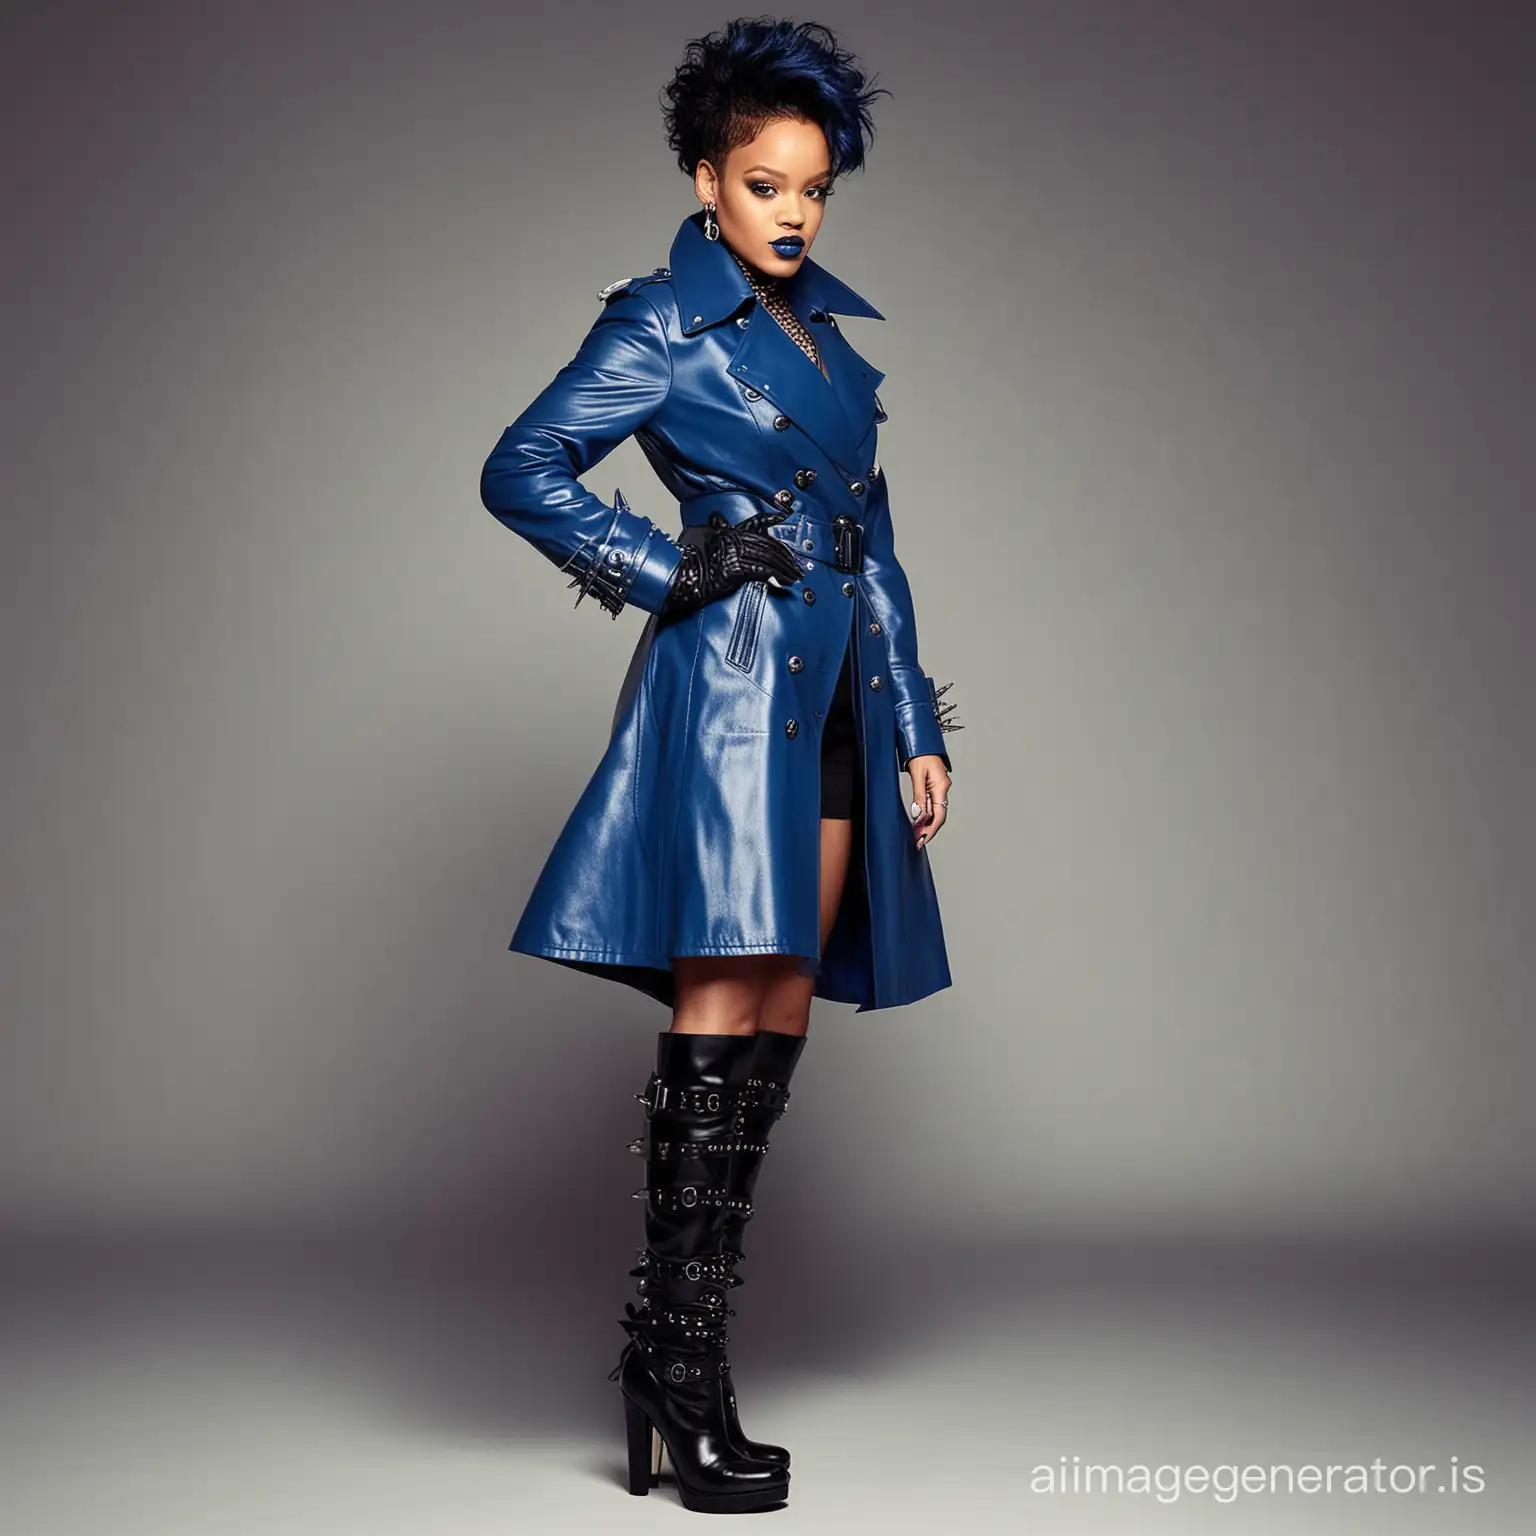 Rihanna-Portrait-Bold-Punk-Rock-Style-with-Blue-Leather-Trench-Coat